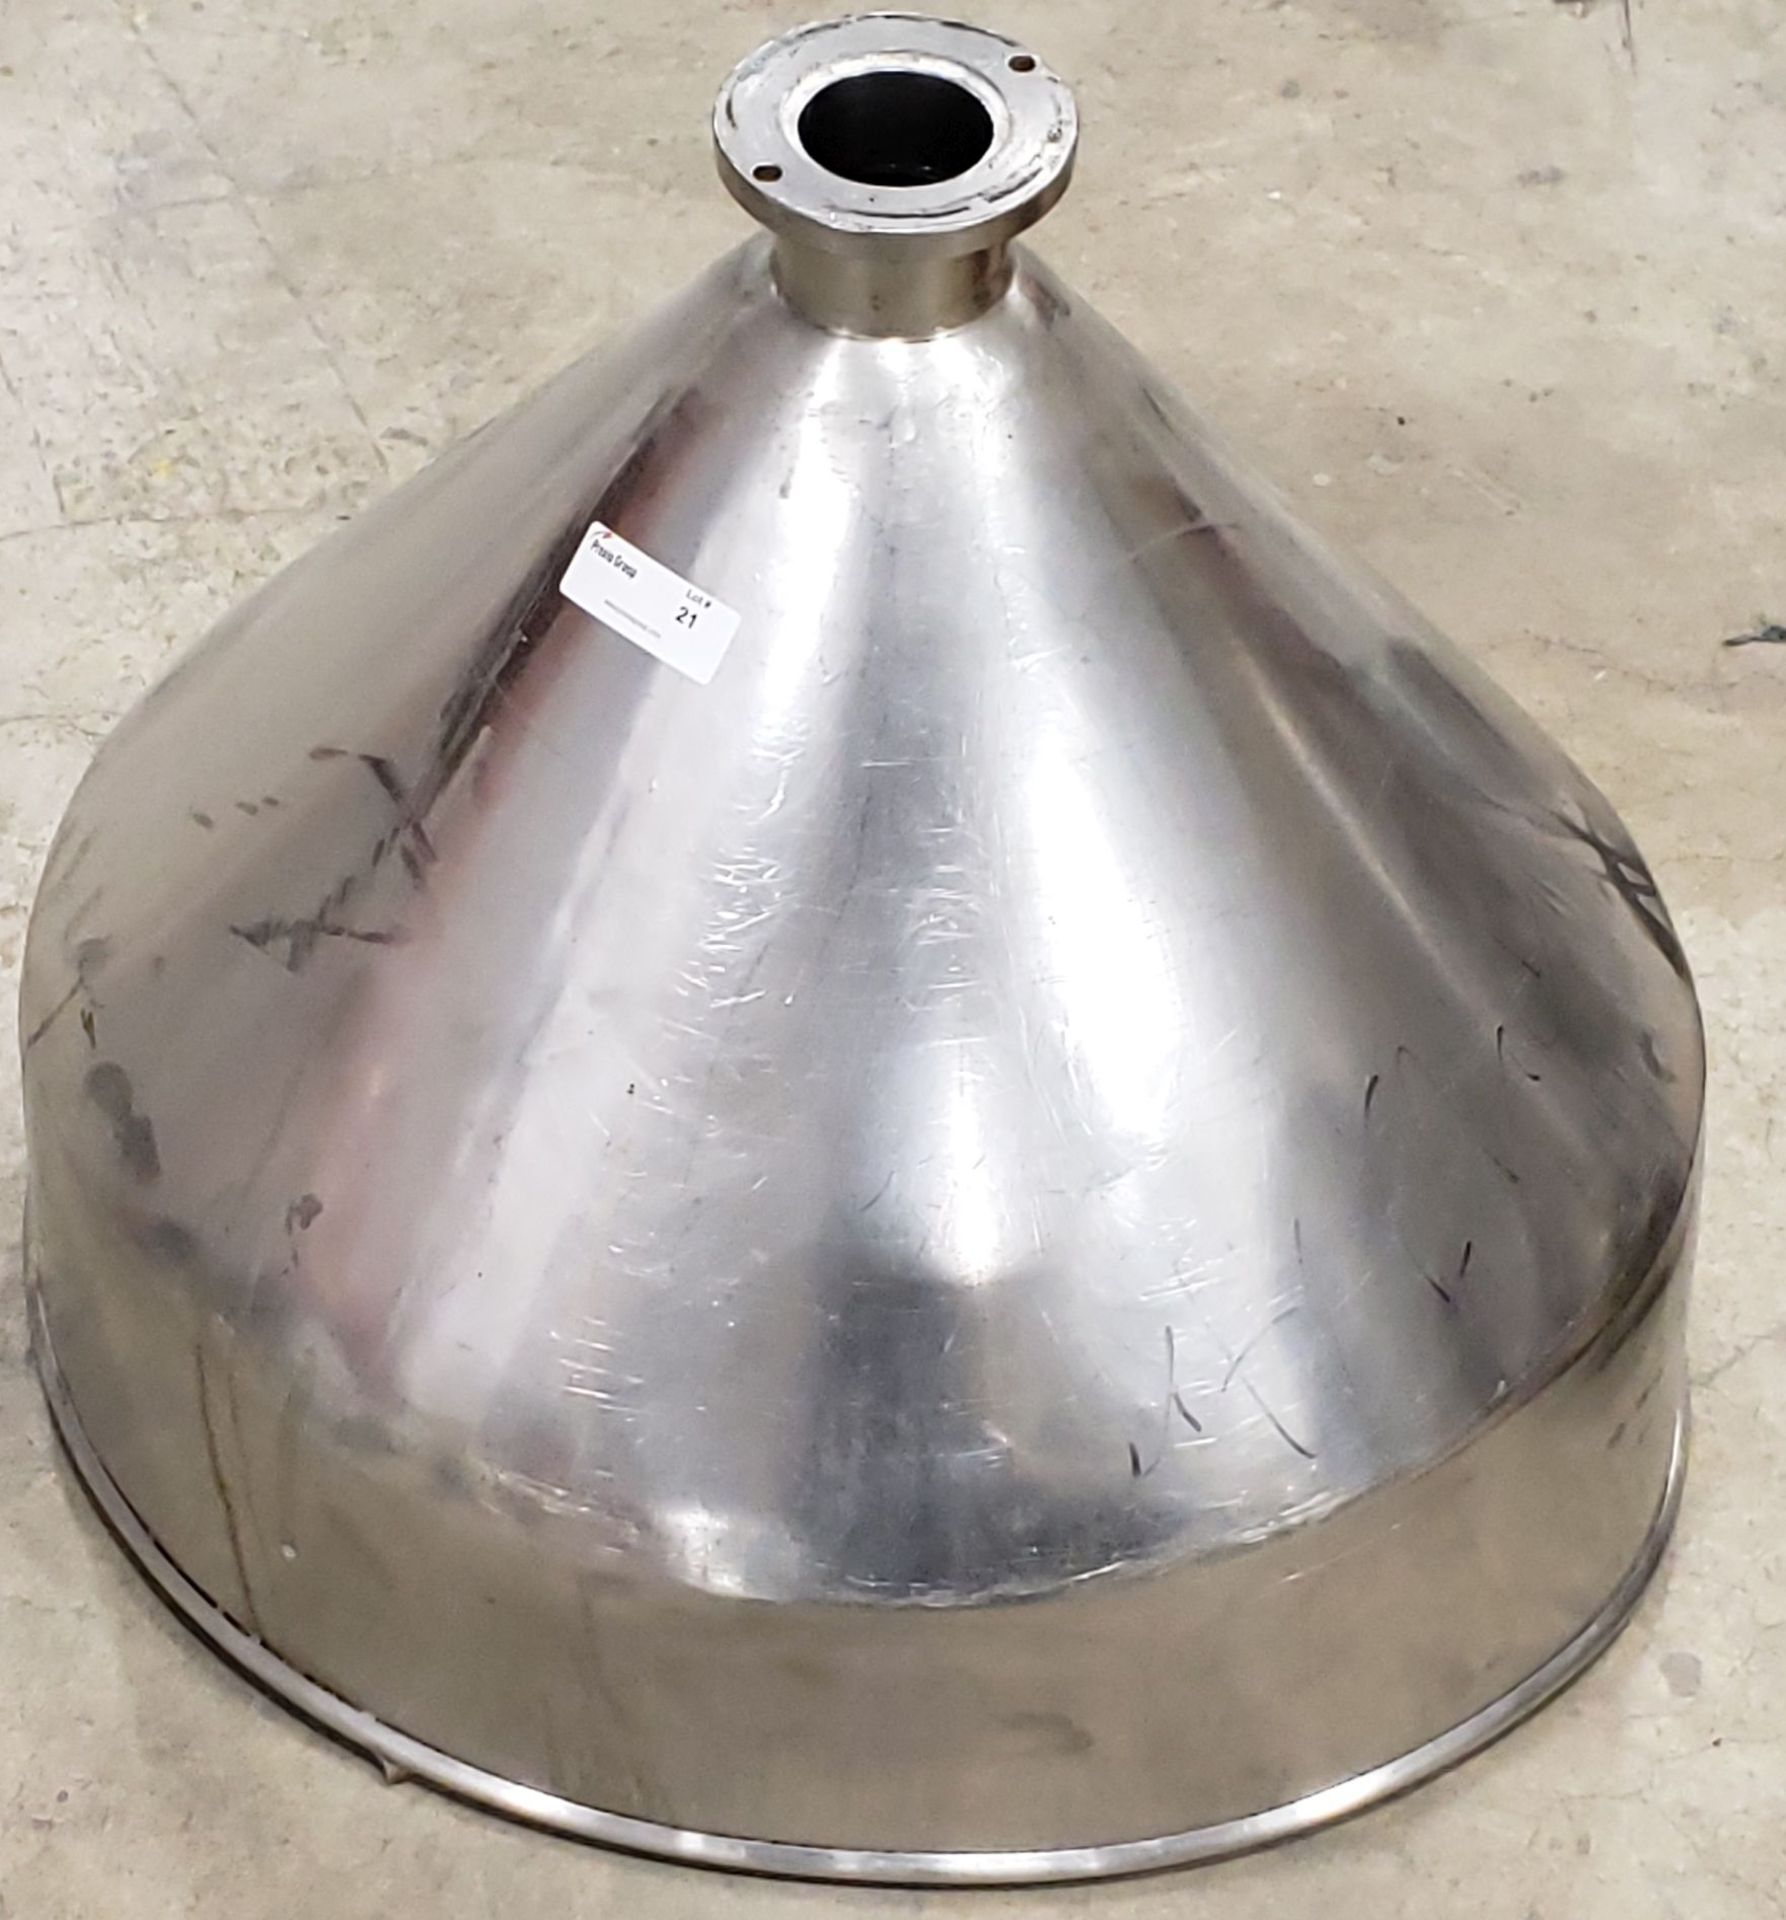 Stainless Steel Hopper 4-1/4 flange 23-1/2" opening x 22" deep - Image 2 of 4